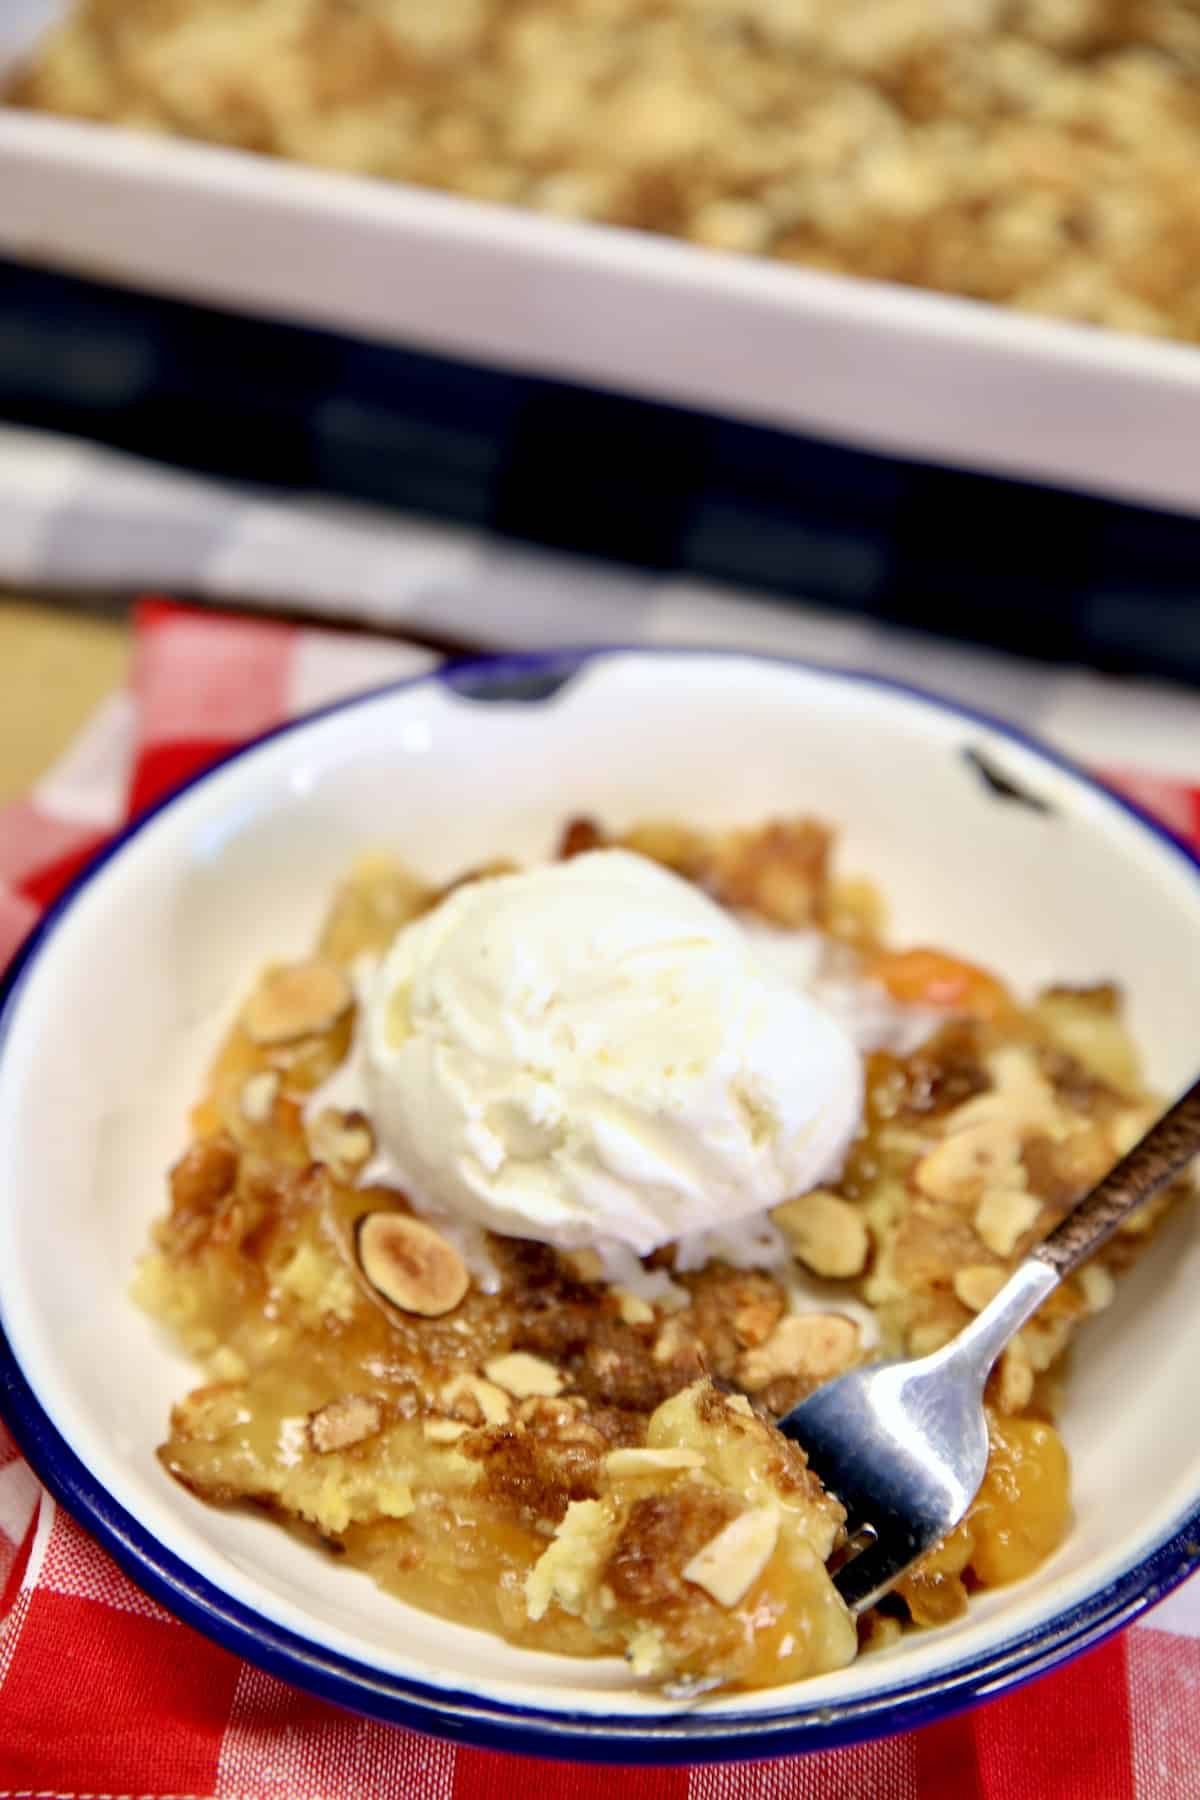 Apricot Dump Cake with vanilla ice cream on a plate with a fork.